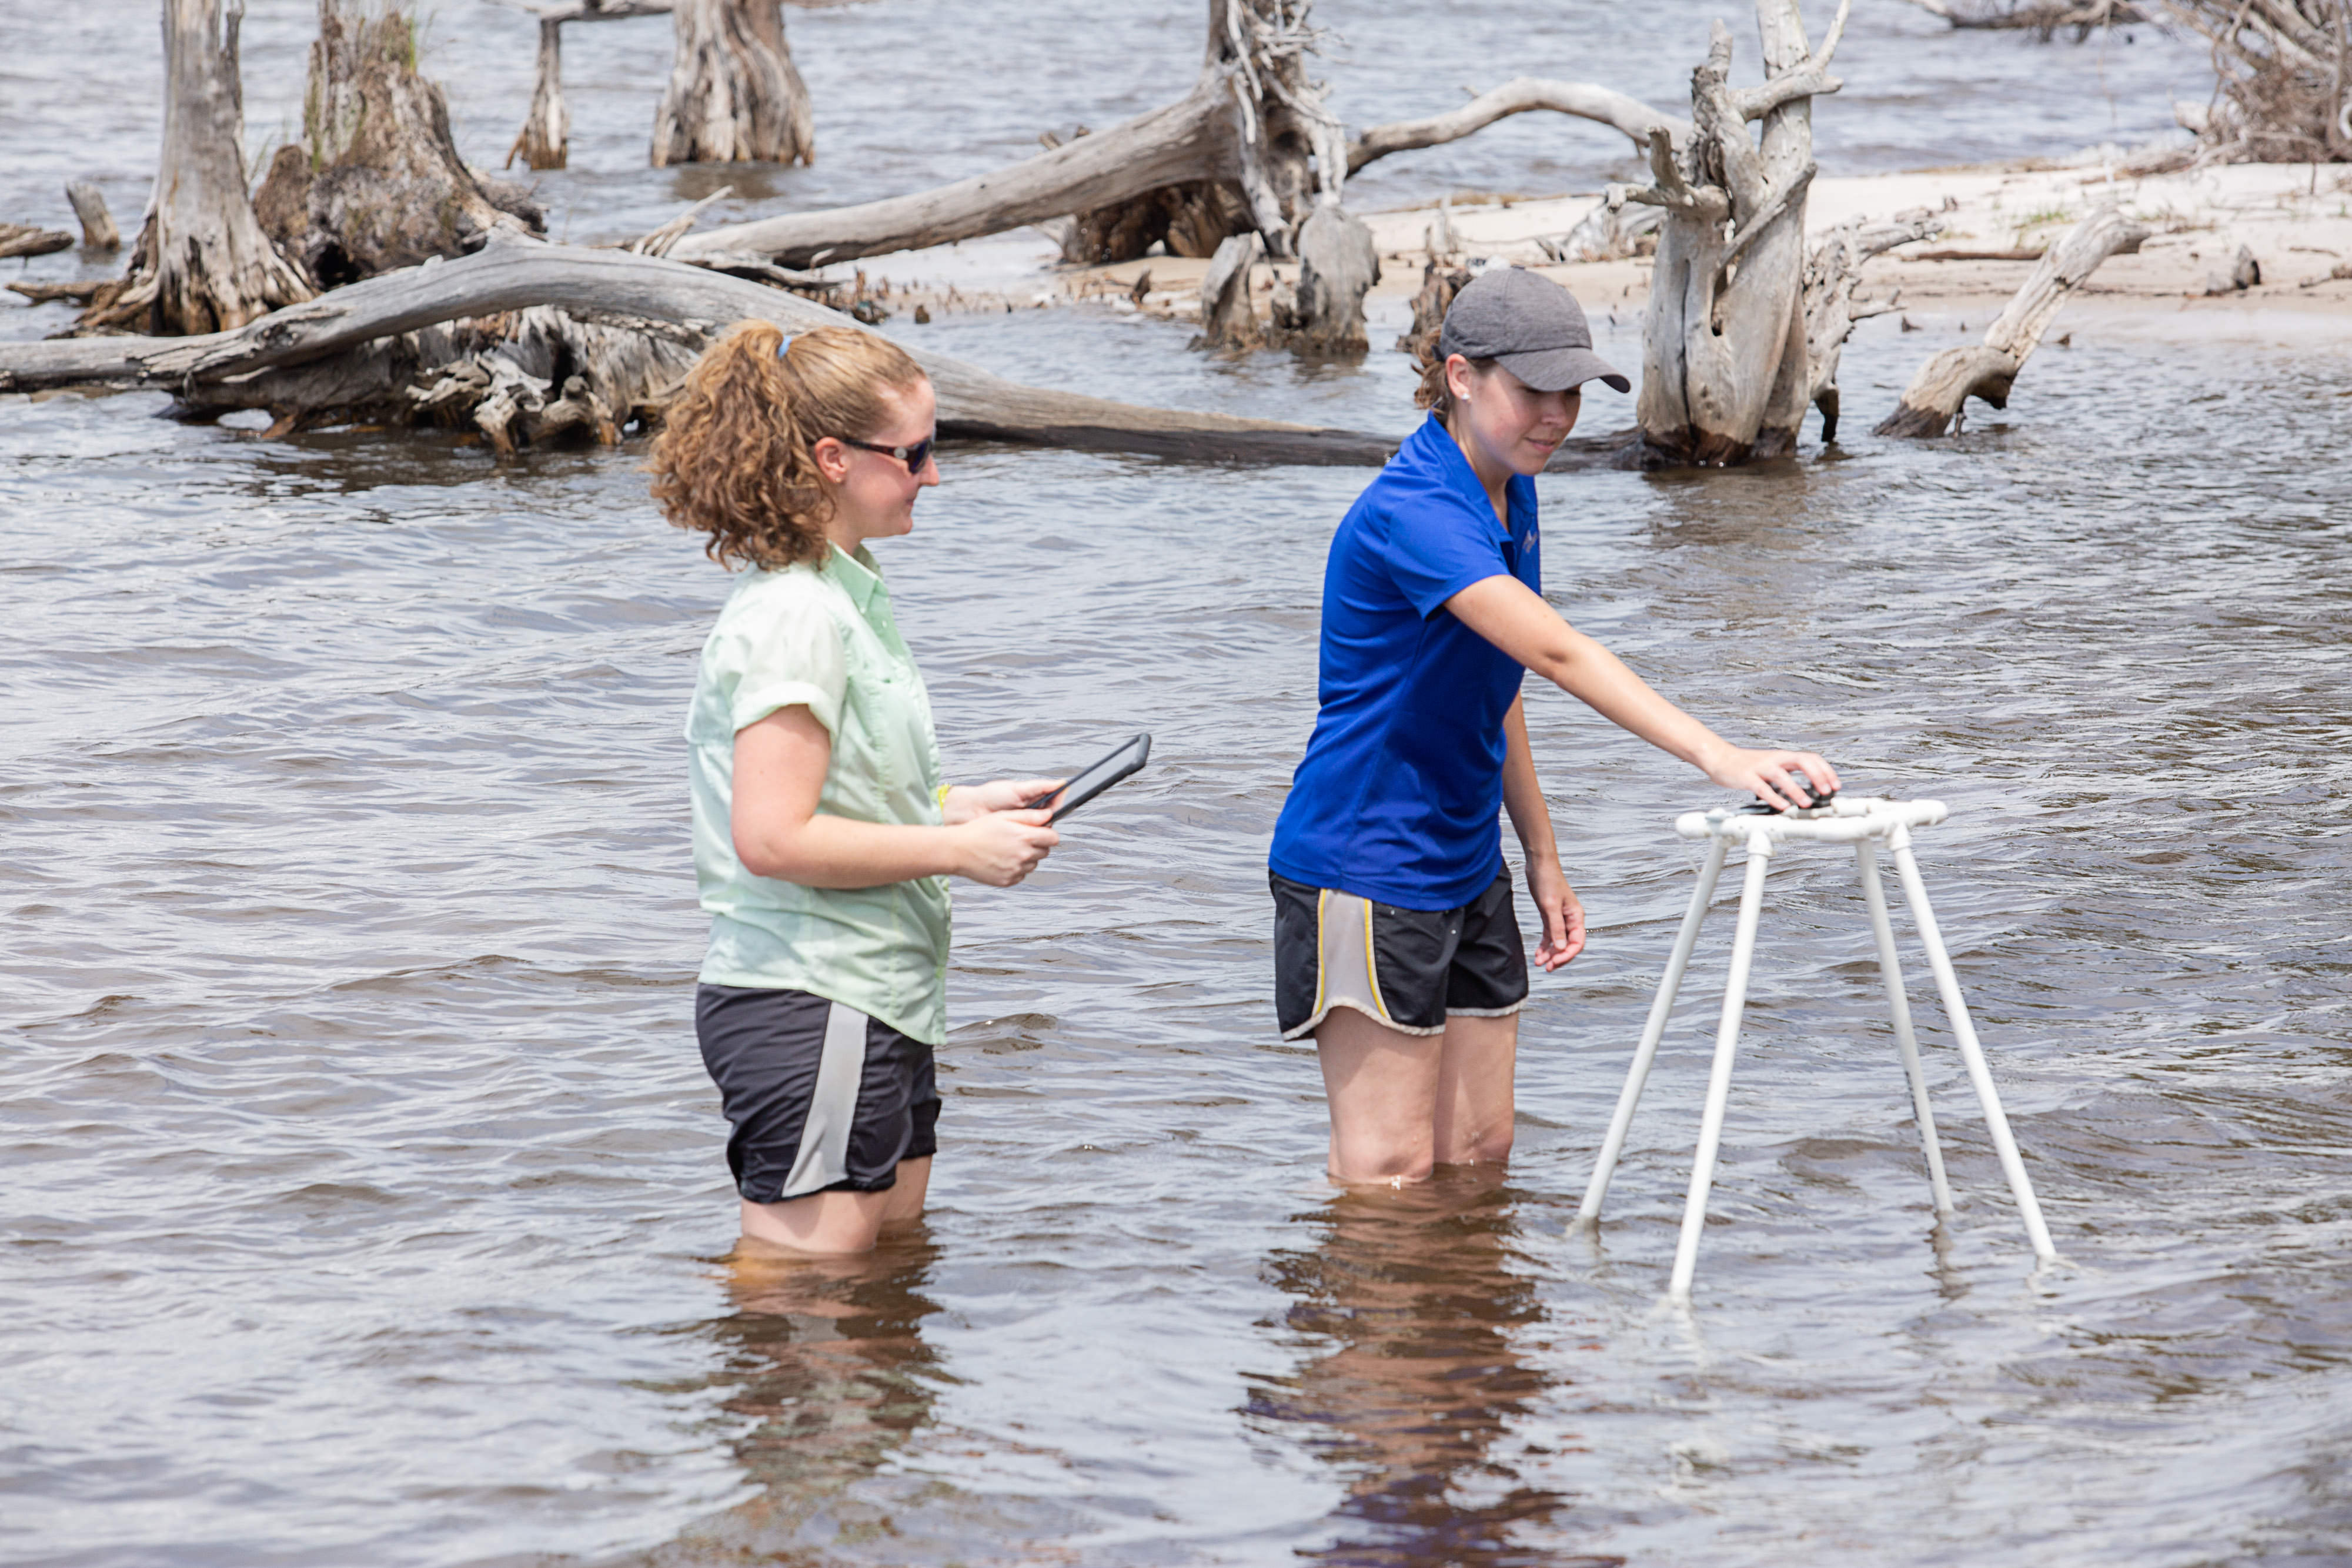 Two female oyster restoration workers side by side knee deep in the bay water conduct scientific monitoring.